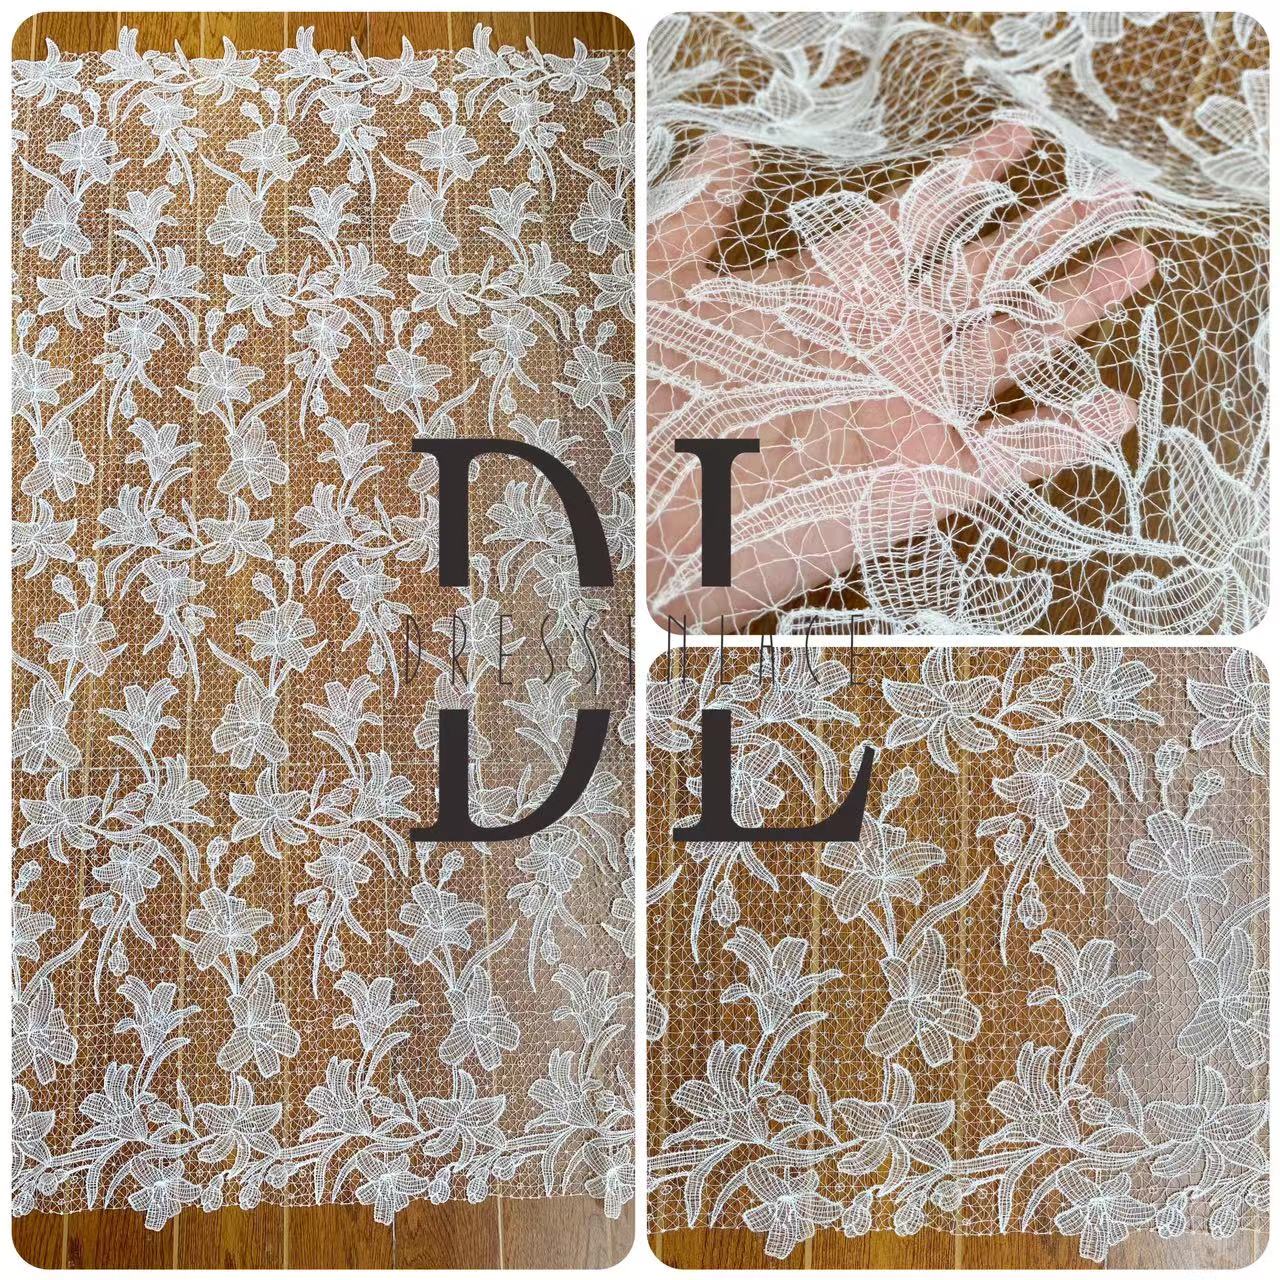 DL130153 Delicate Lace Fabric with beautiful beads and sequins